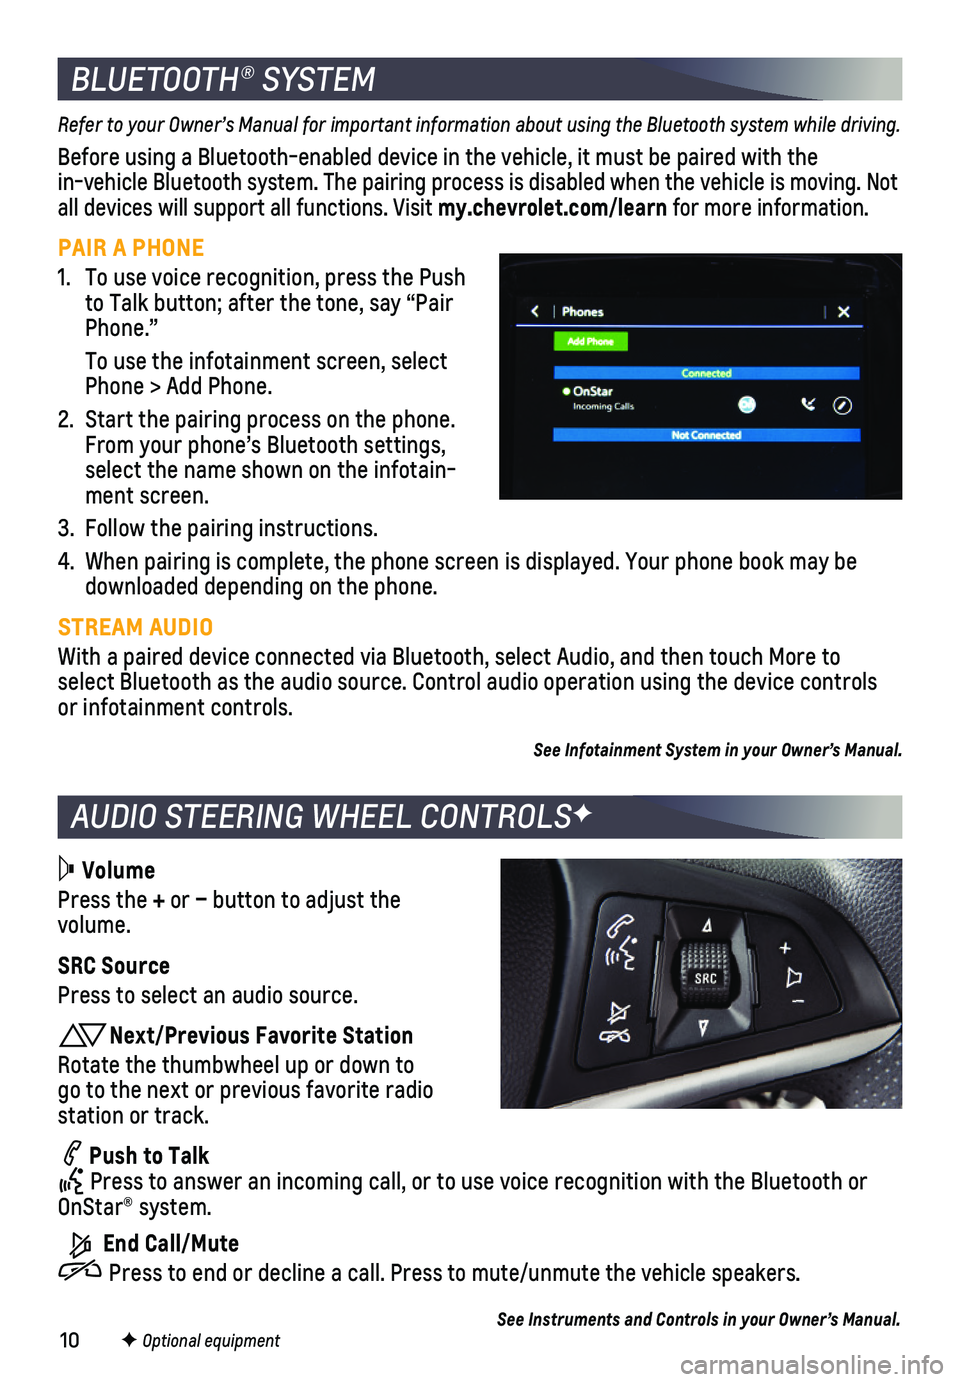 CHEVROLET SPARK 2019  Get To Know Guide 10
AUDIO STEERING WHEEL CONTROLSF
BLUETOOTH® SYSTEM
Refer to your Owner’s Manual for important information about using the Bluetooth system while driving.
Before using a Bluetooth-enabled device in